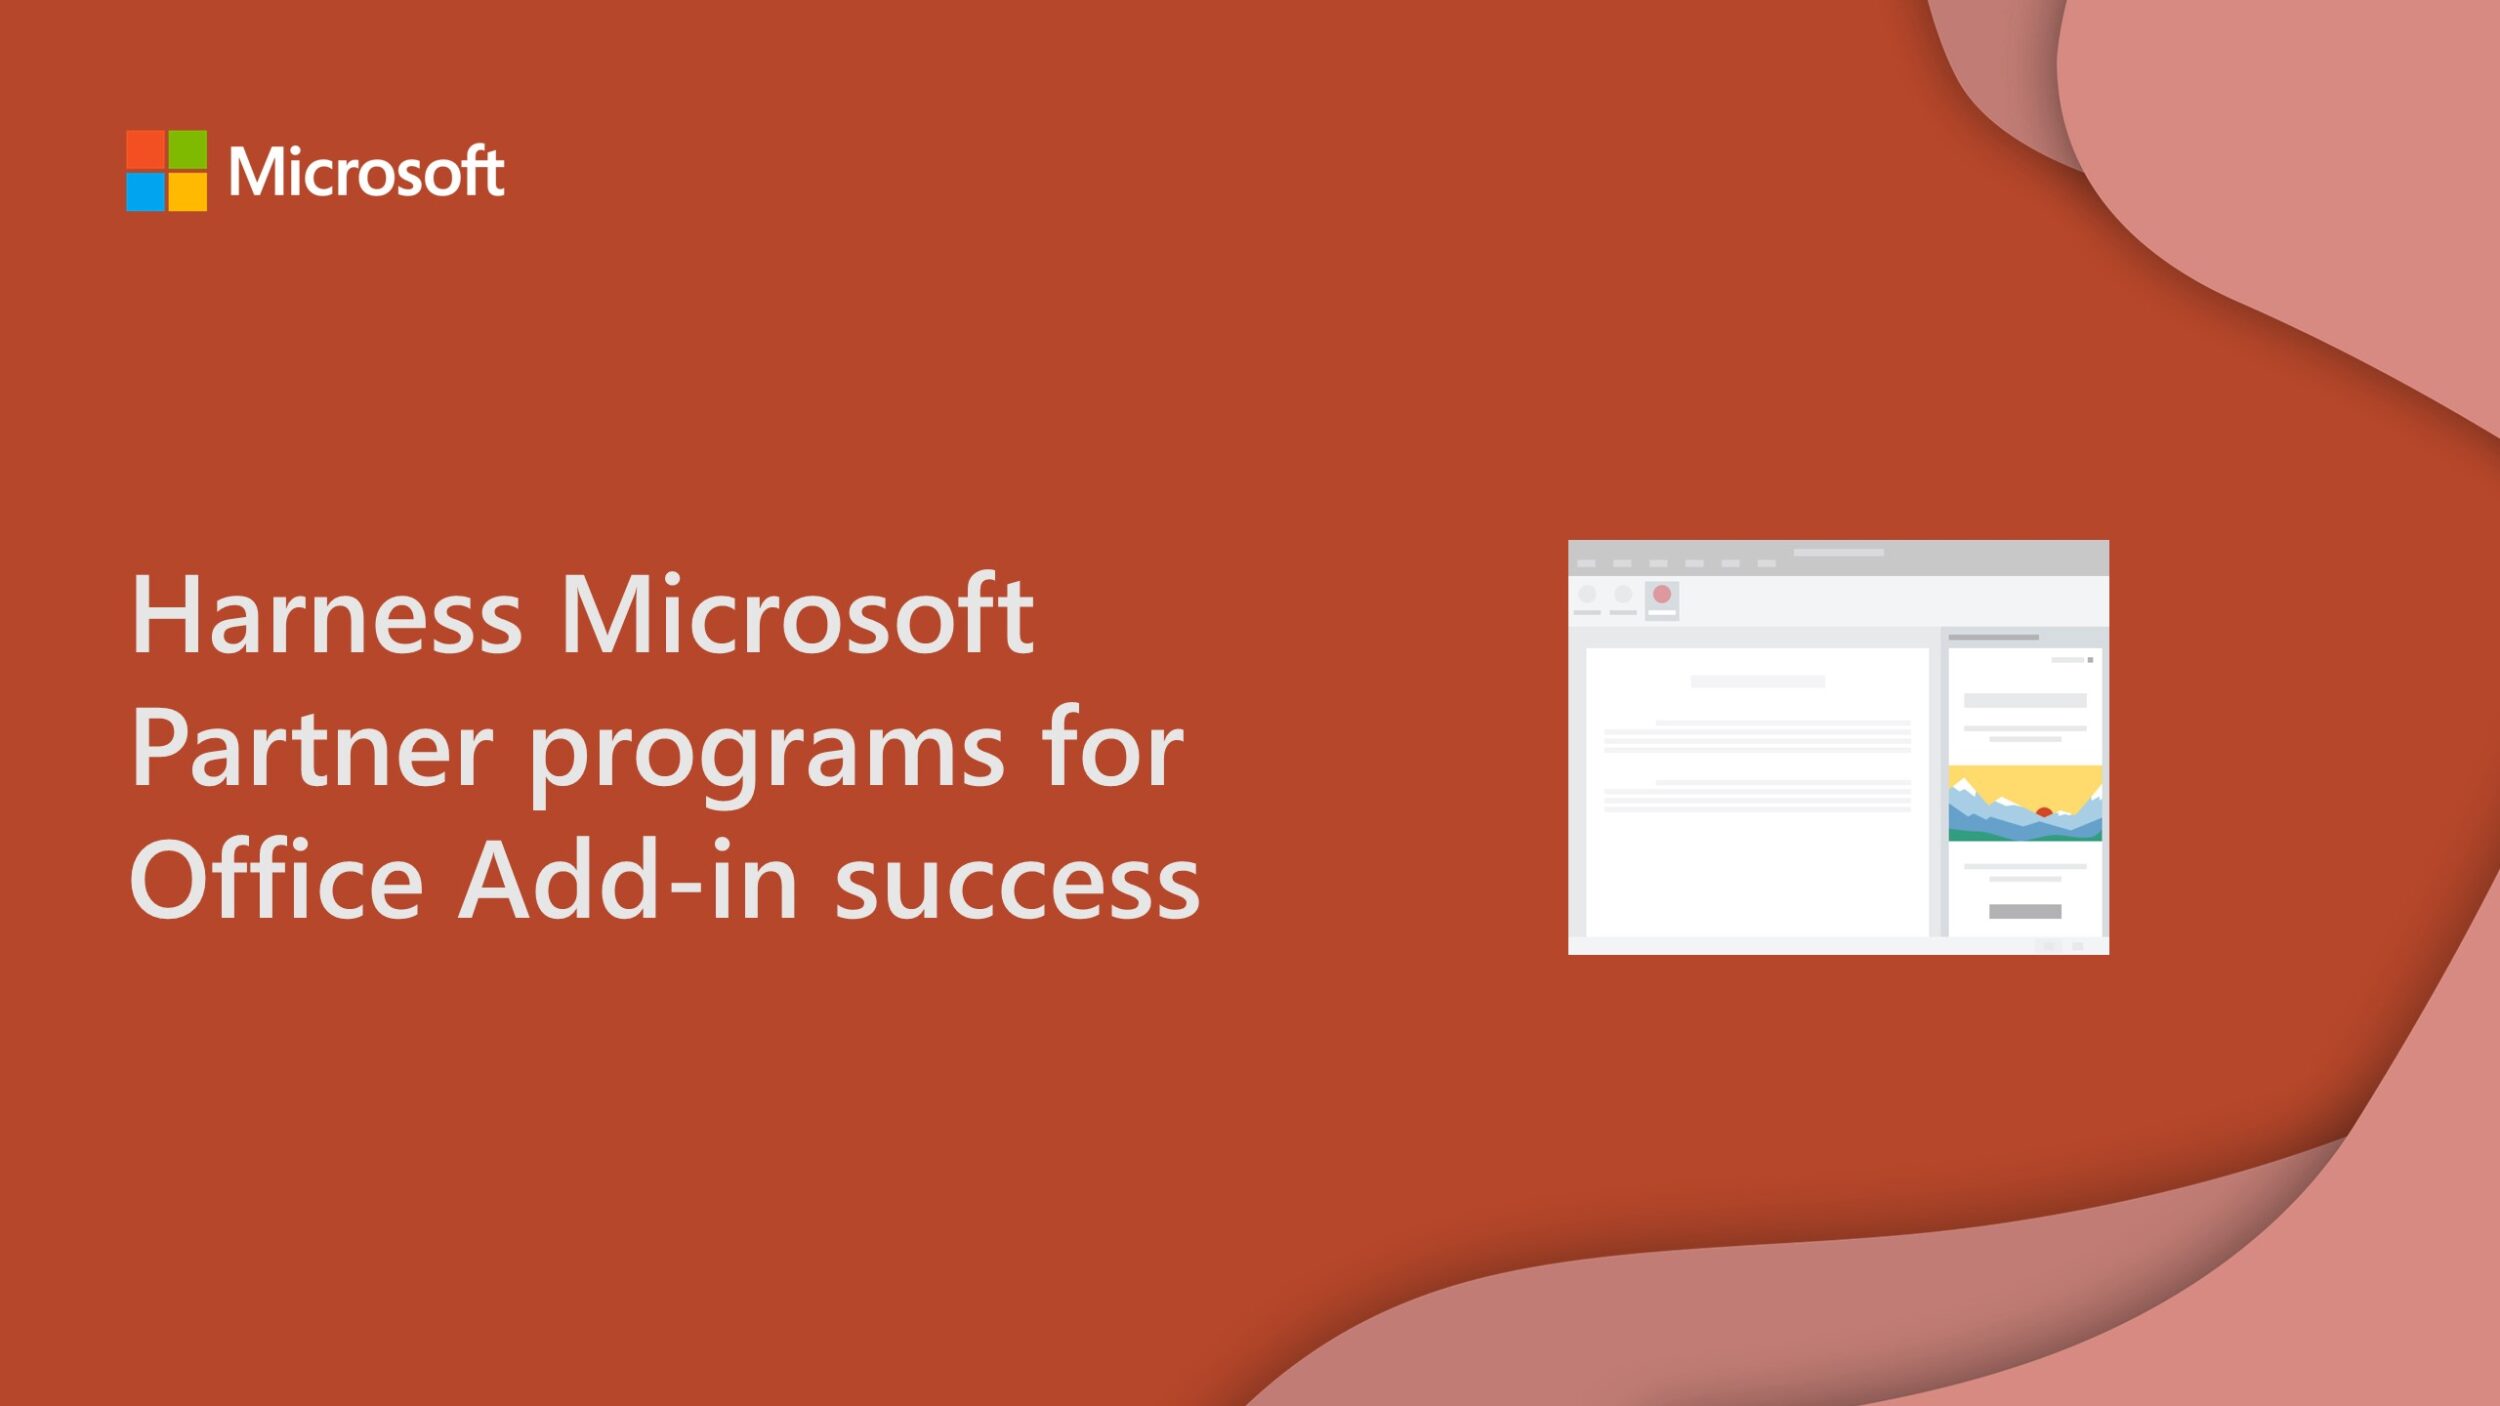 Make your Office Add-in successful by harnessing free Microsoft Partner programs!